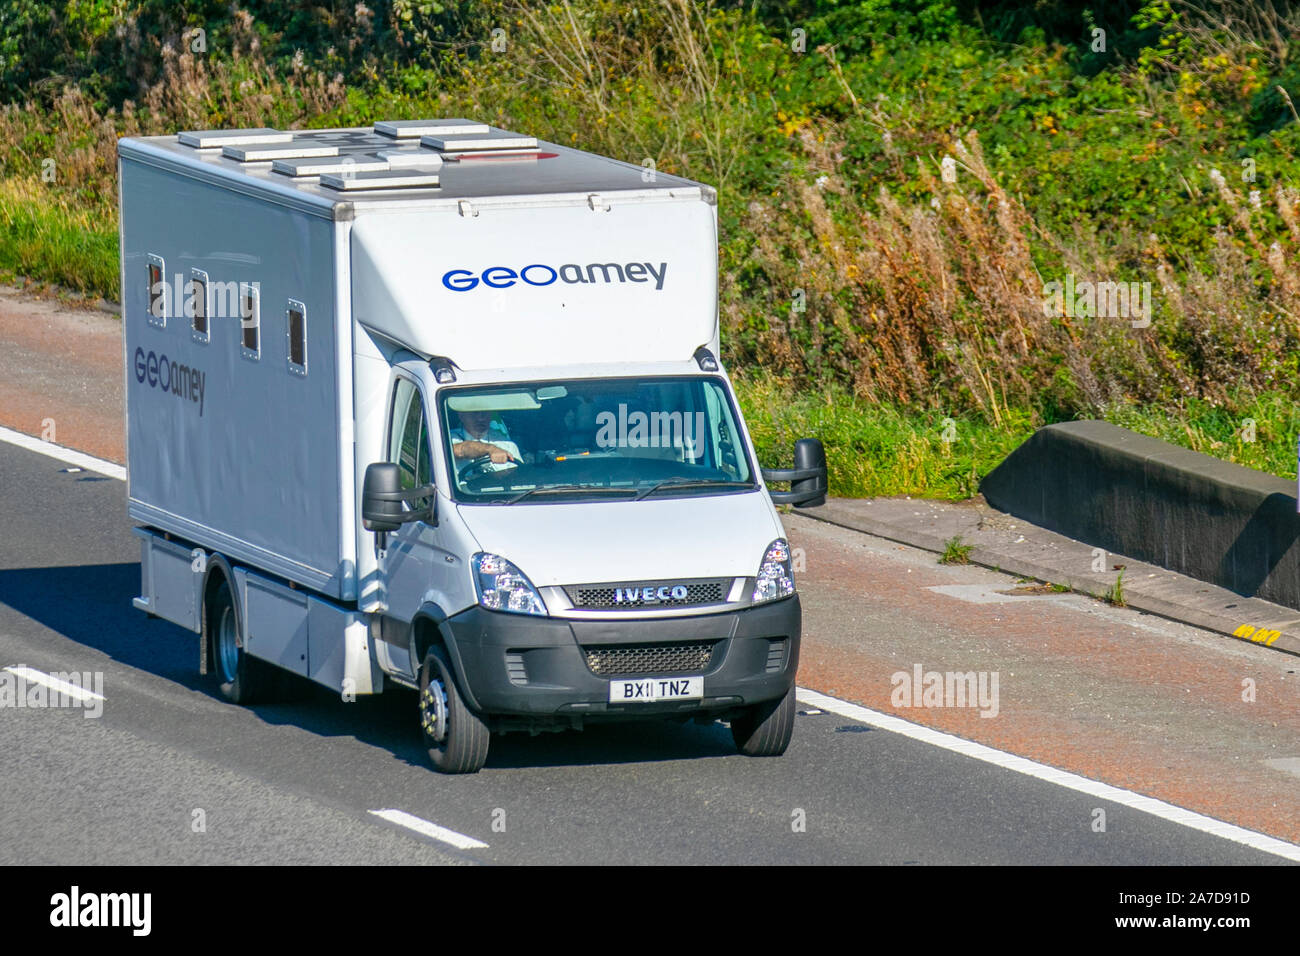 GeoAmey white Iveco Van; UK Vehicular traffic, transport, modern vehicles, commercial vans, south-bound on the 3 lane M6 motorway highway. Stock Photo